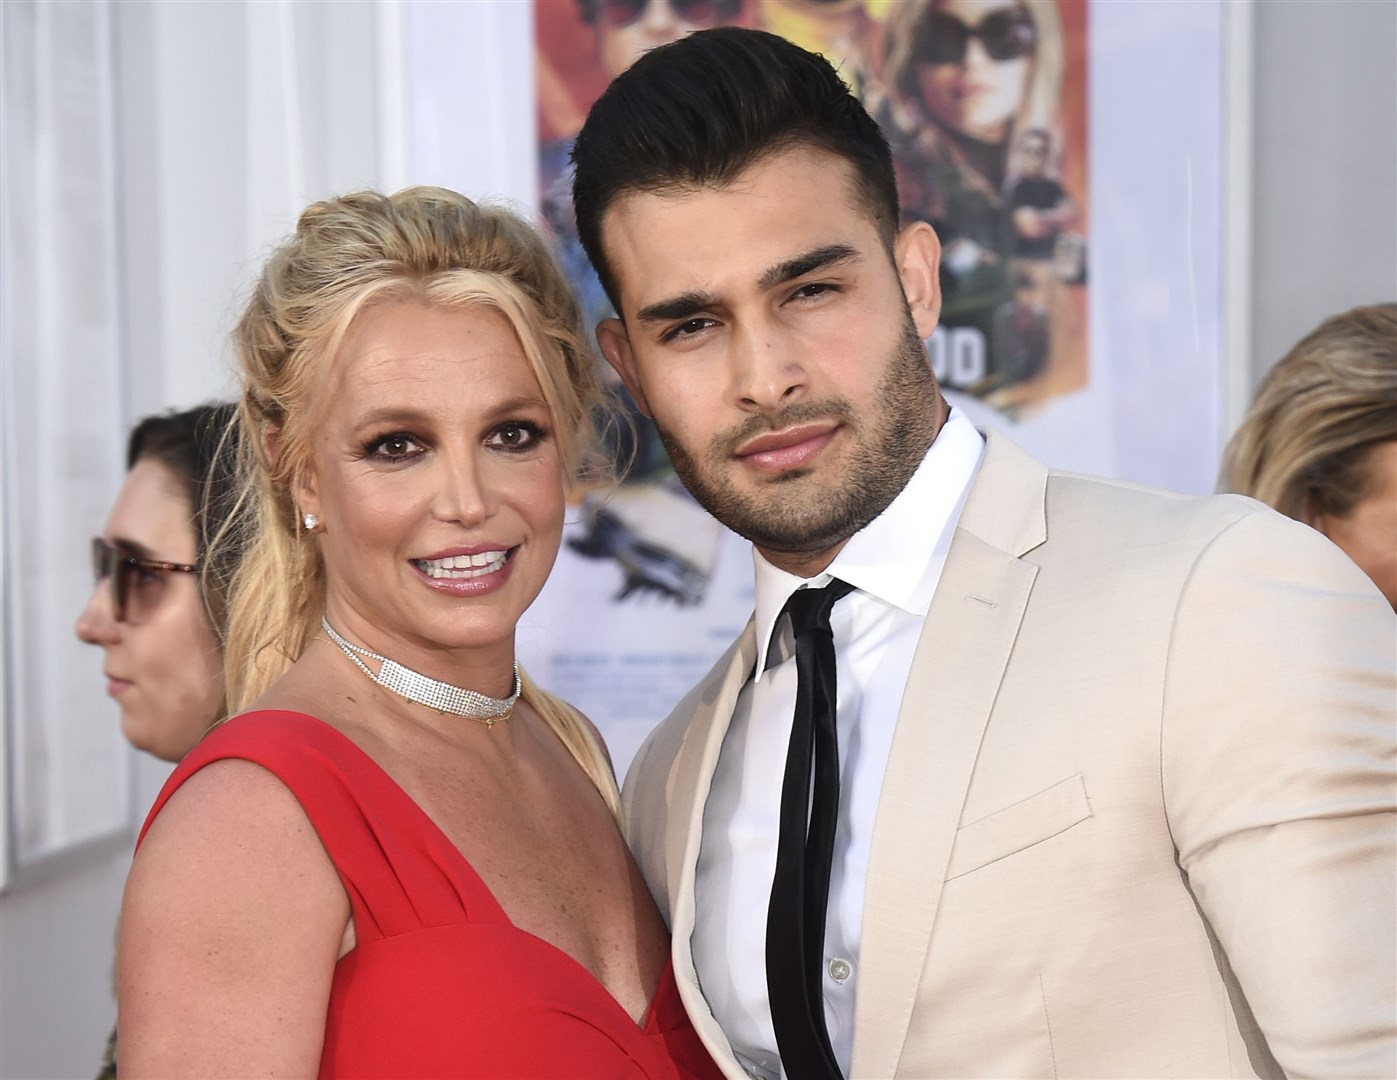 Alexander attempted to crash the wedding of Britney Spears and Sam Asghari (pictured) last Thursday (Jordan Strauss/AP)